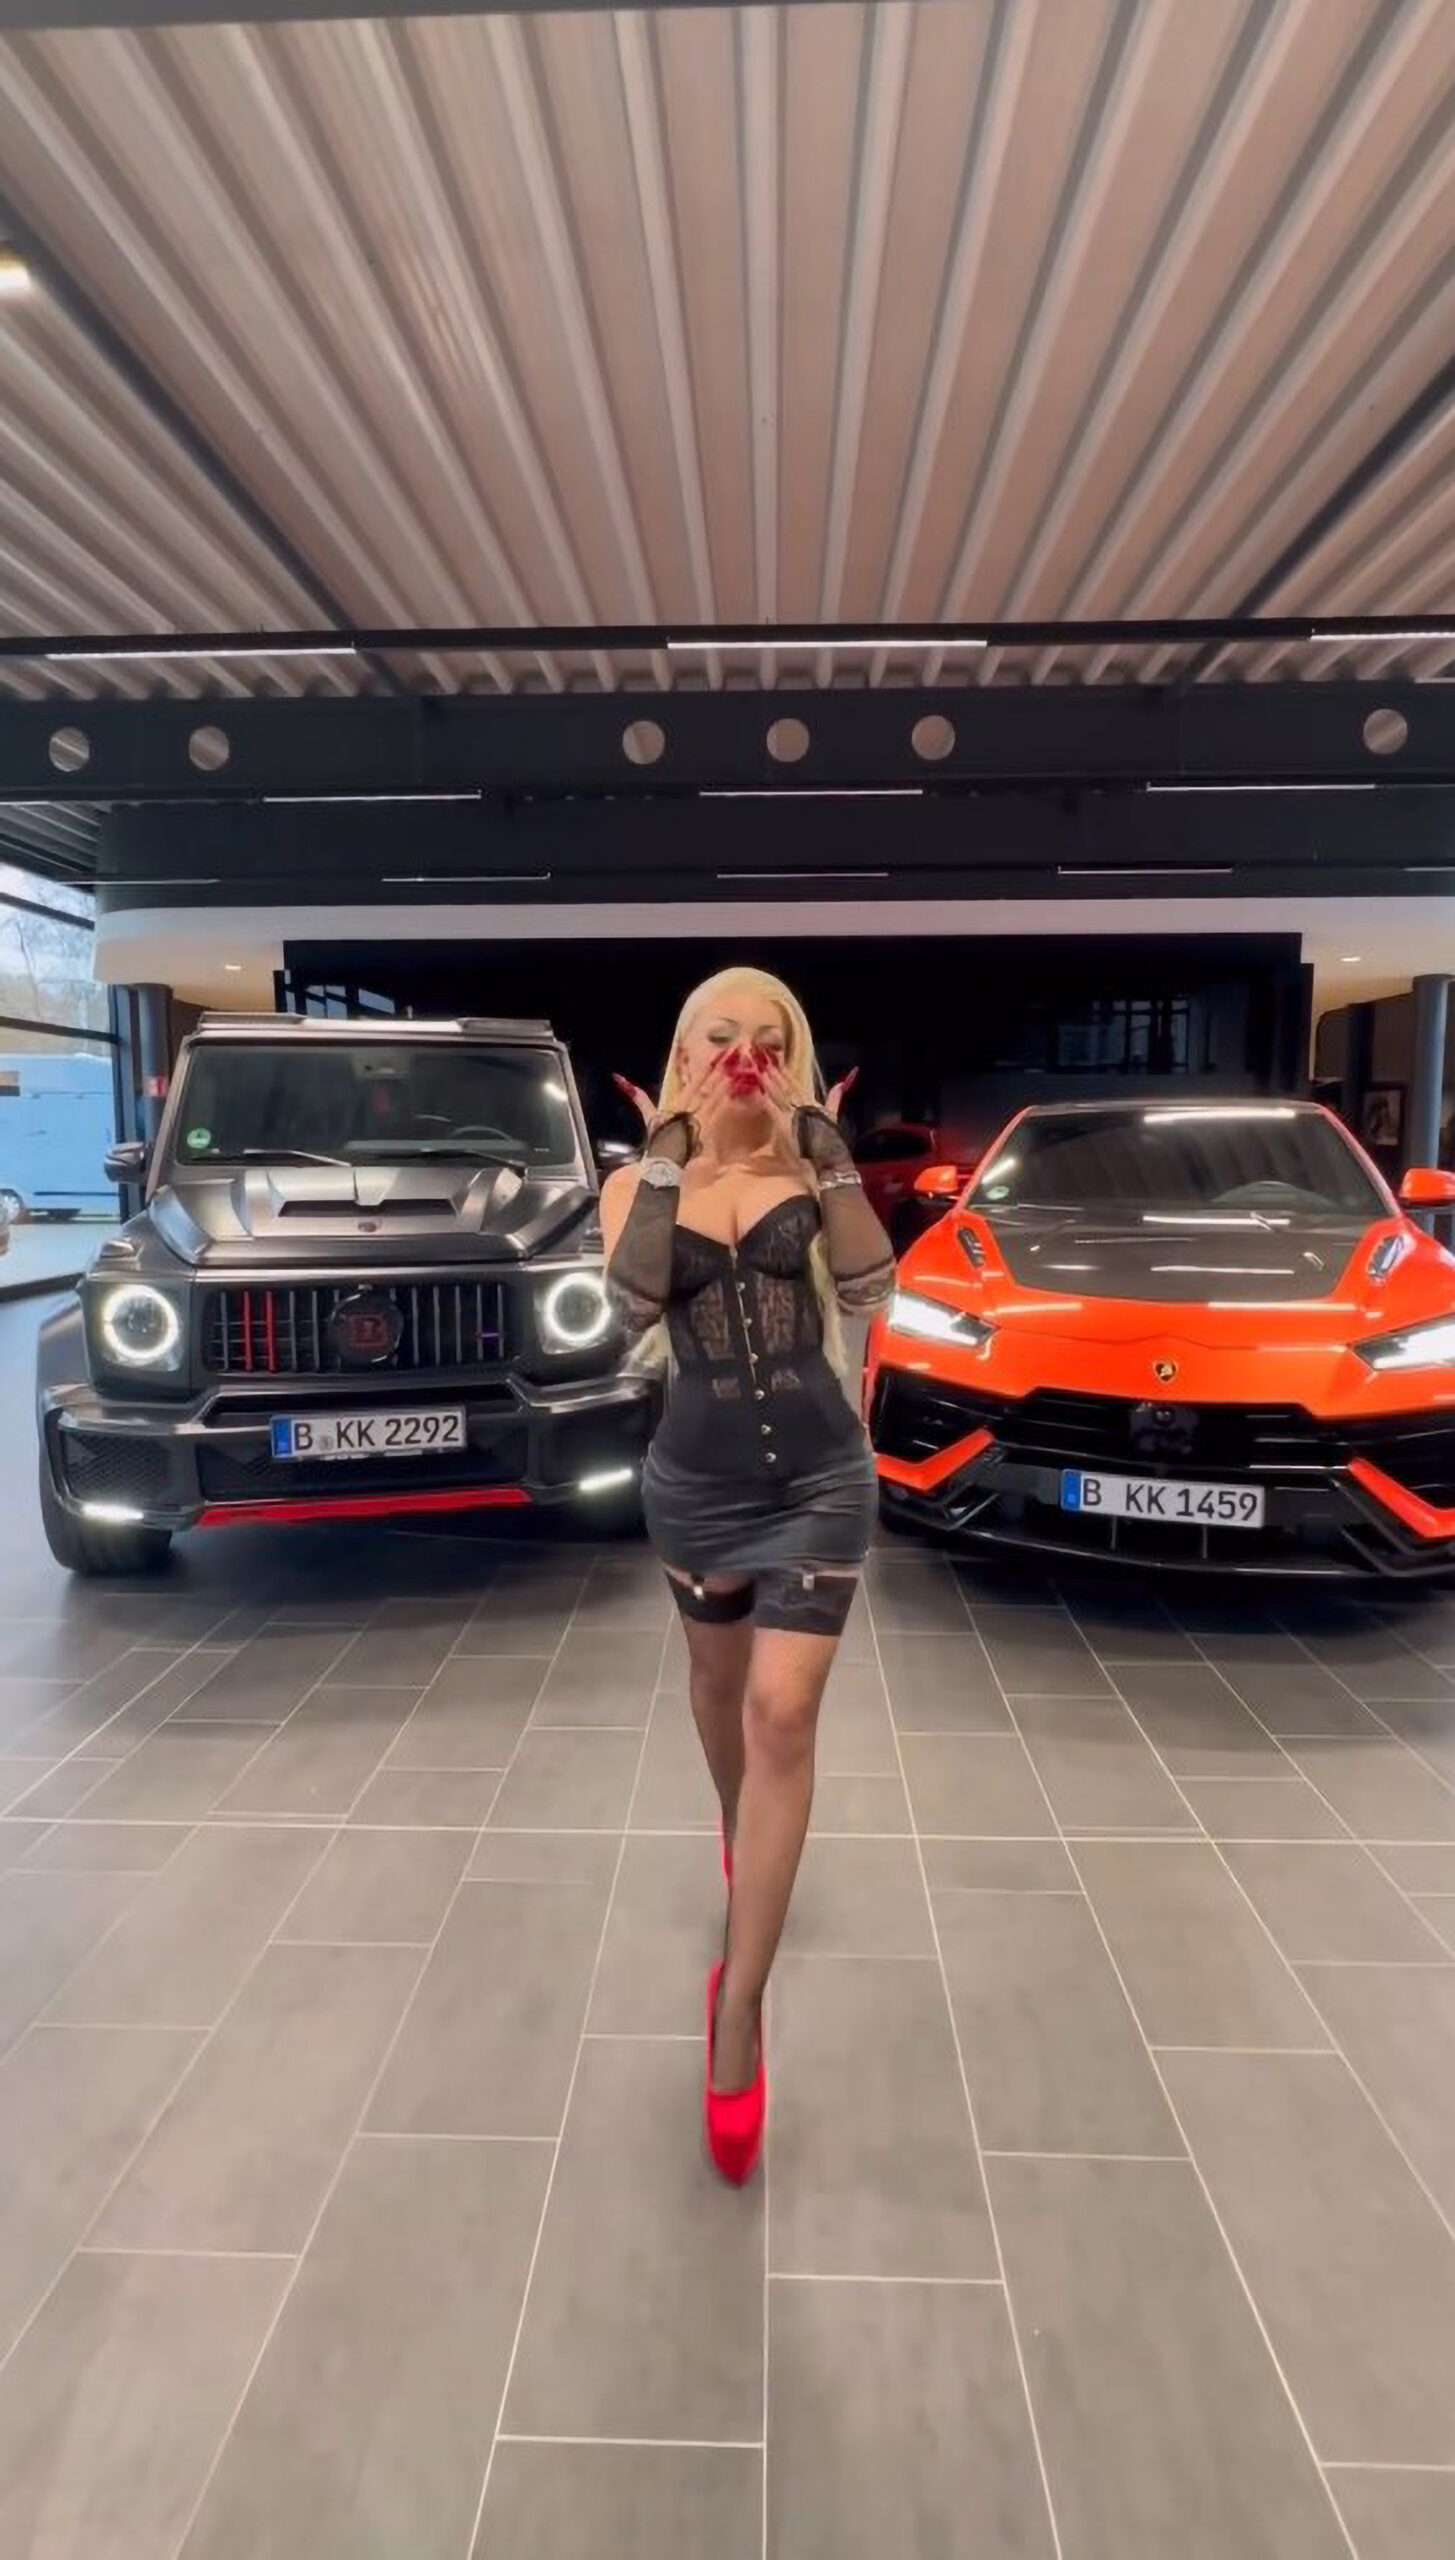 Read more about the article OnlyFans Star Buys Two Luxury Motors